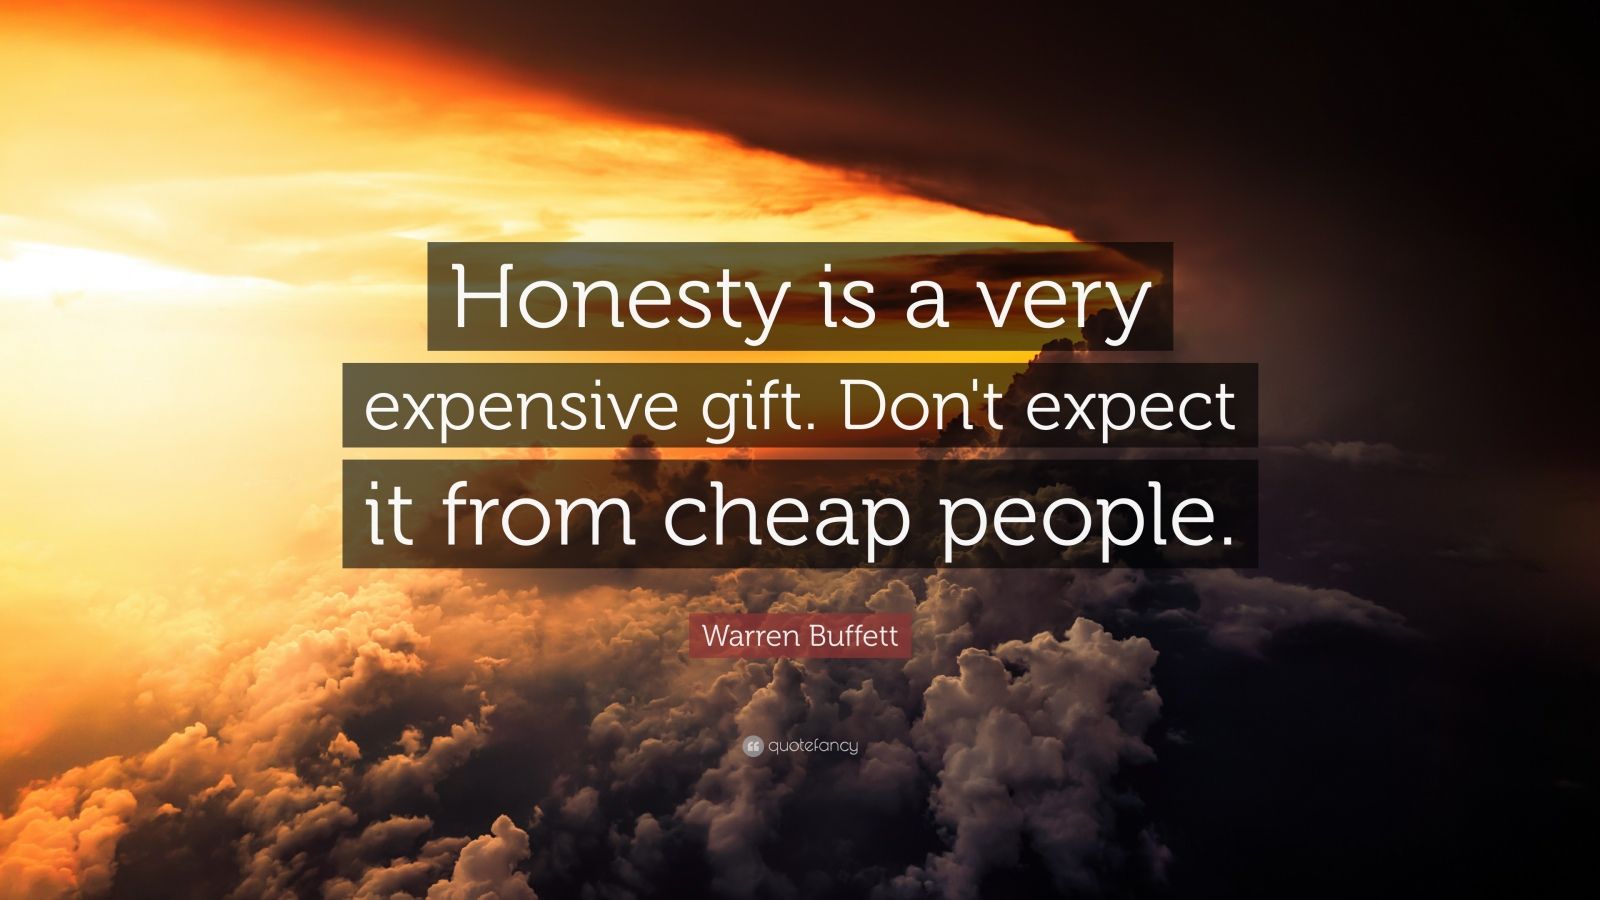 1701359 Warren Buffett Quote Honesty is a very expensive gift Don t